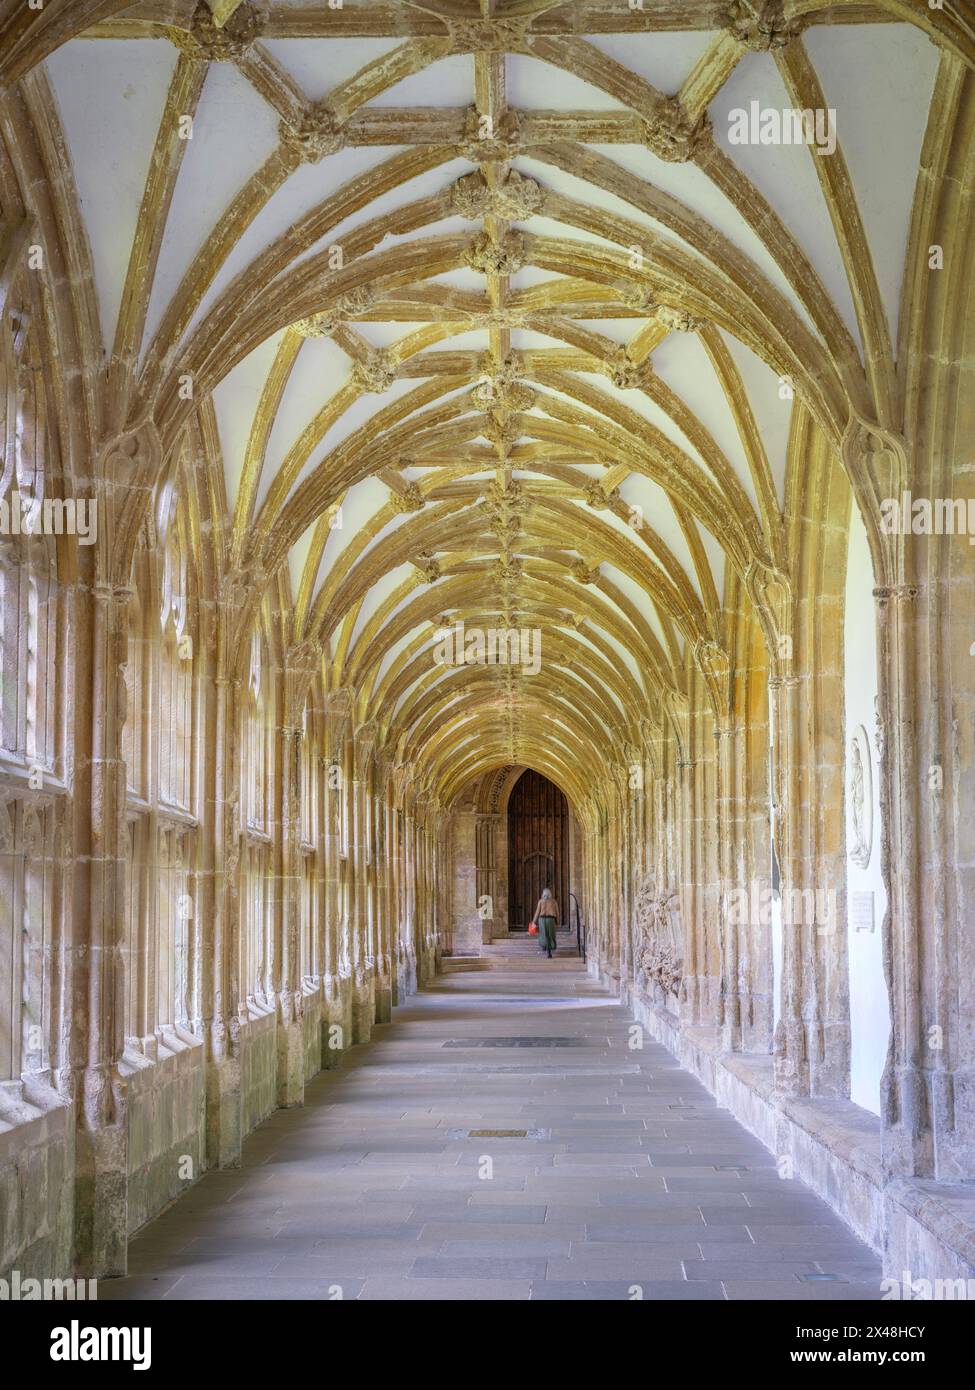 The medieval Gothic cloisters of Wells Cathedral in Somerset UK Stock Photo